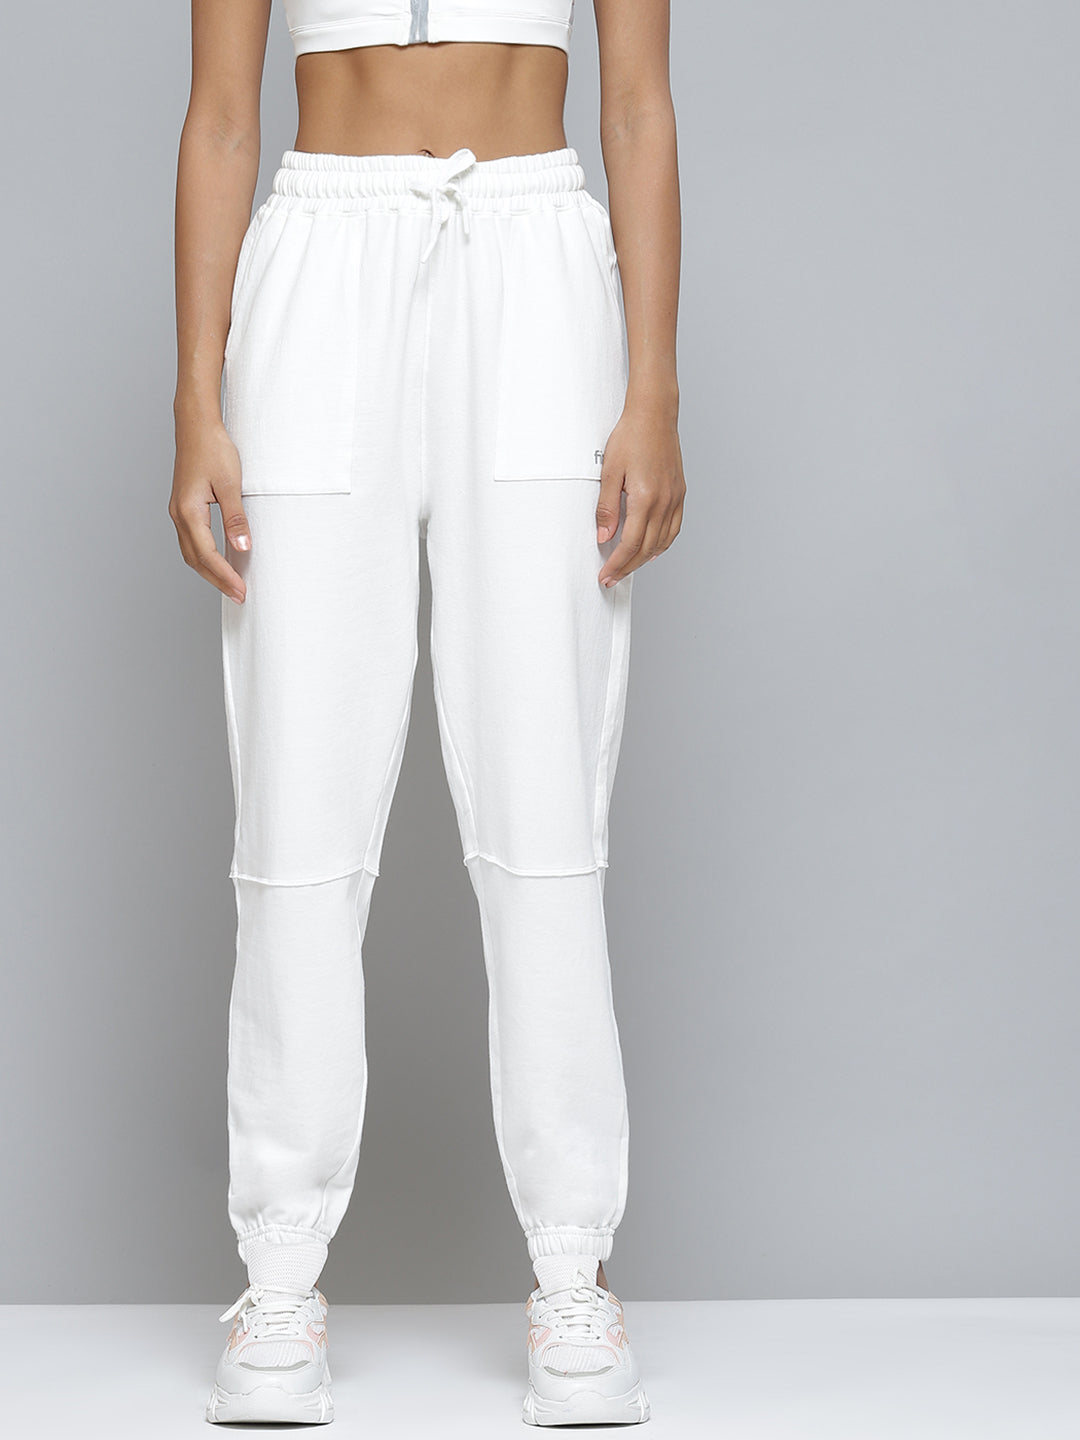 Essential White Joggers, 450 GSM Organic Cotton